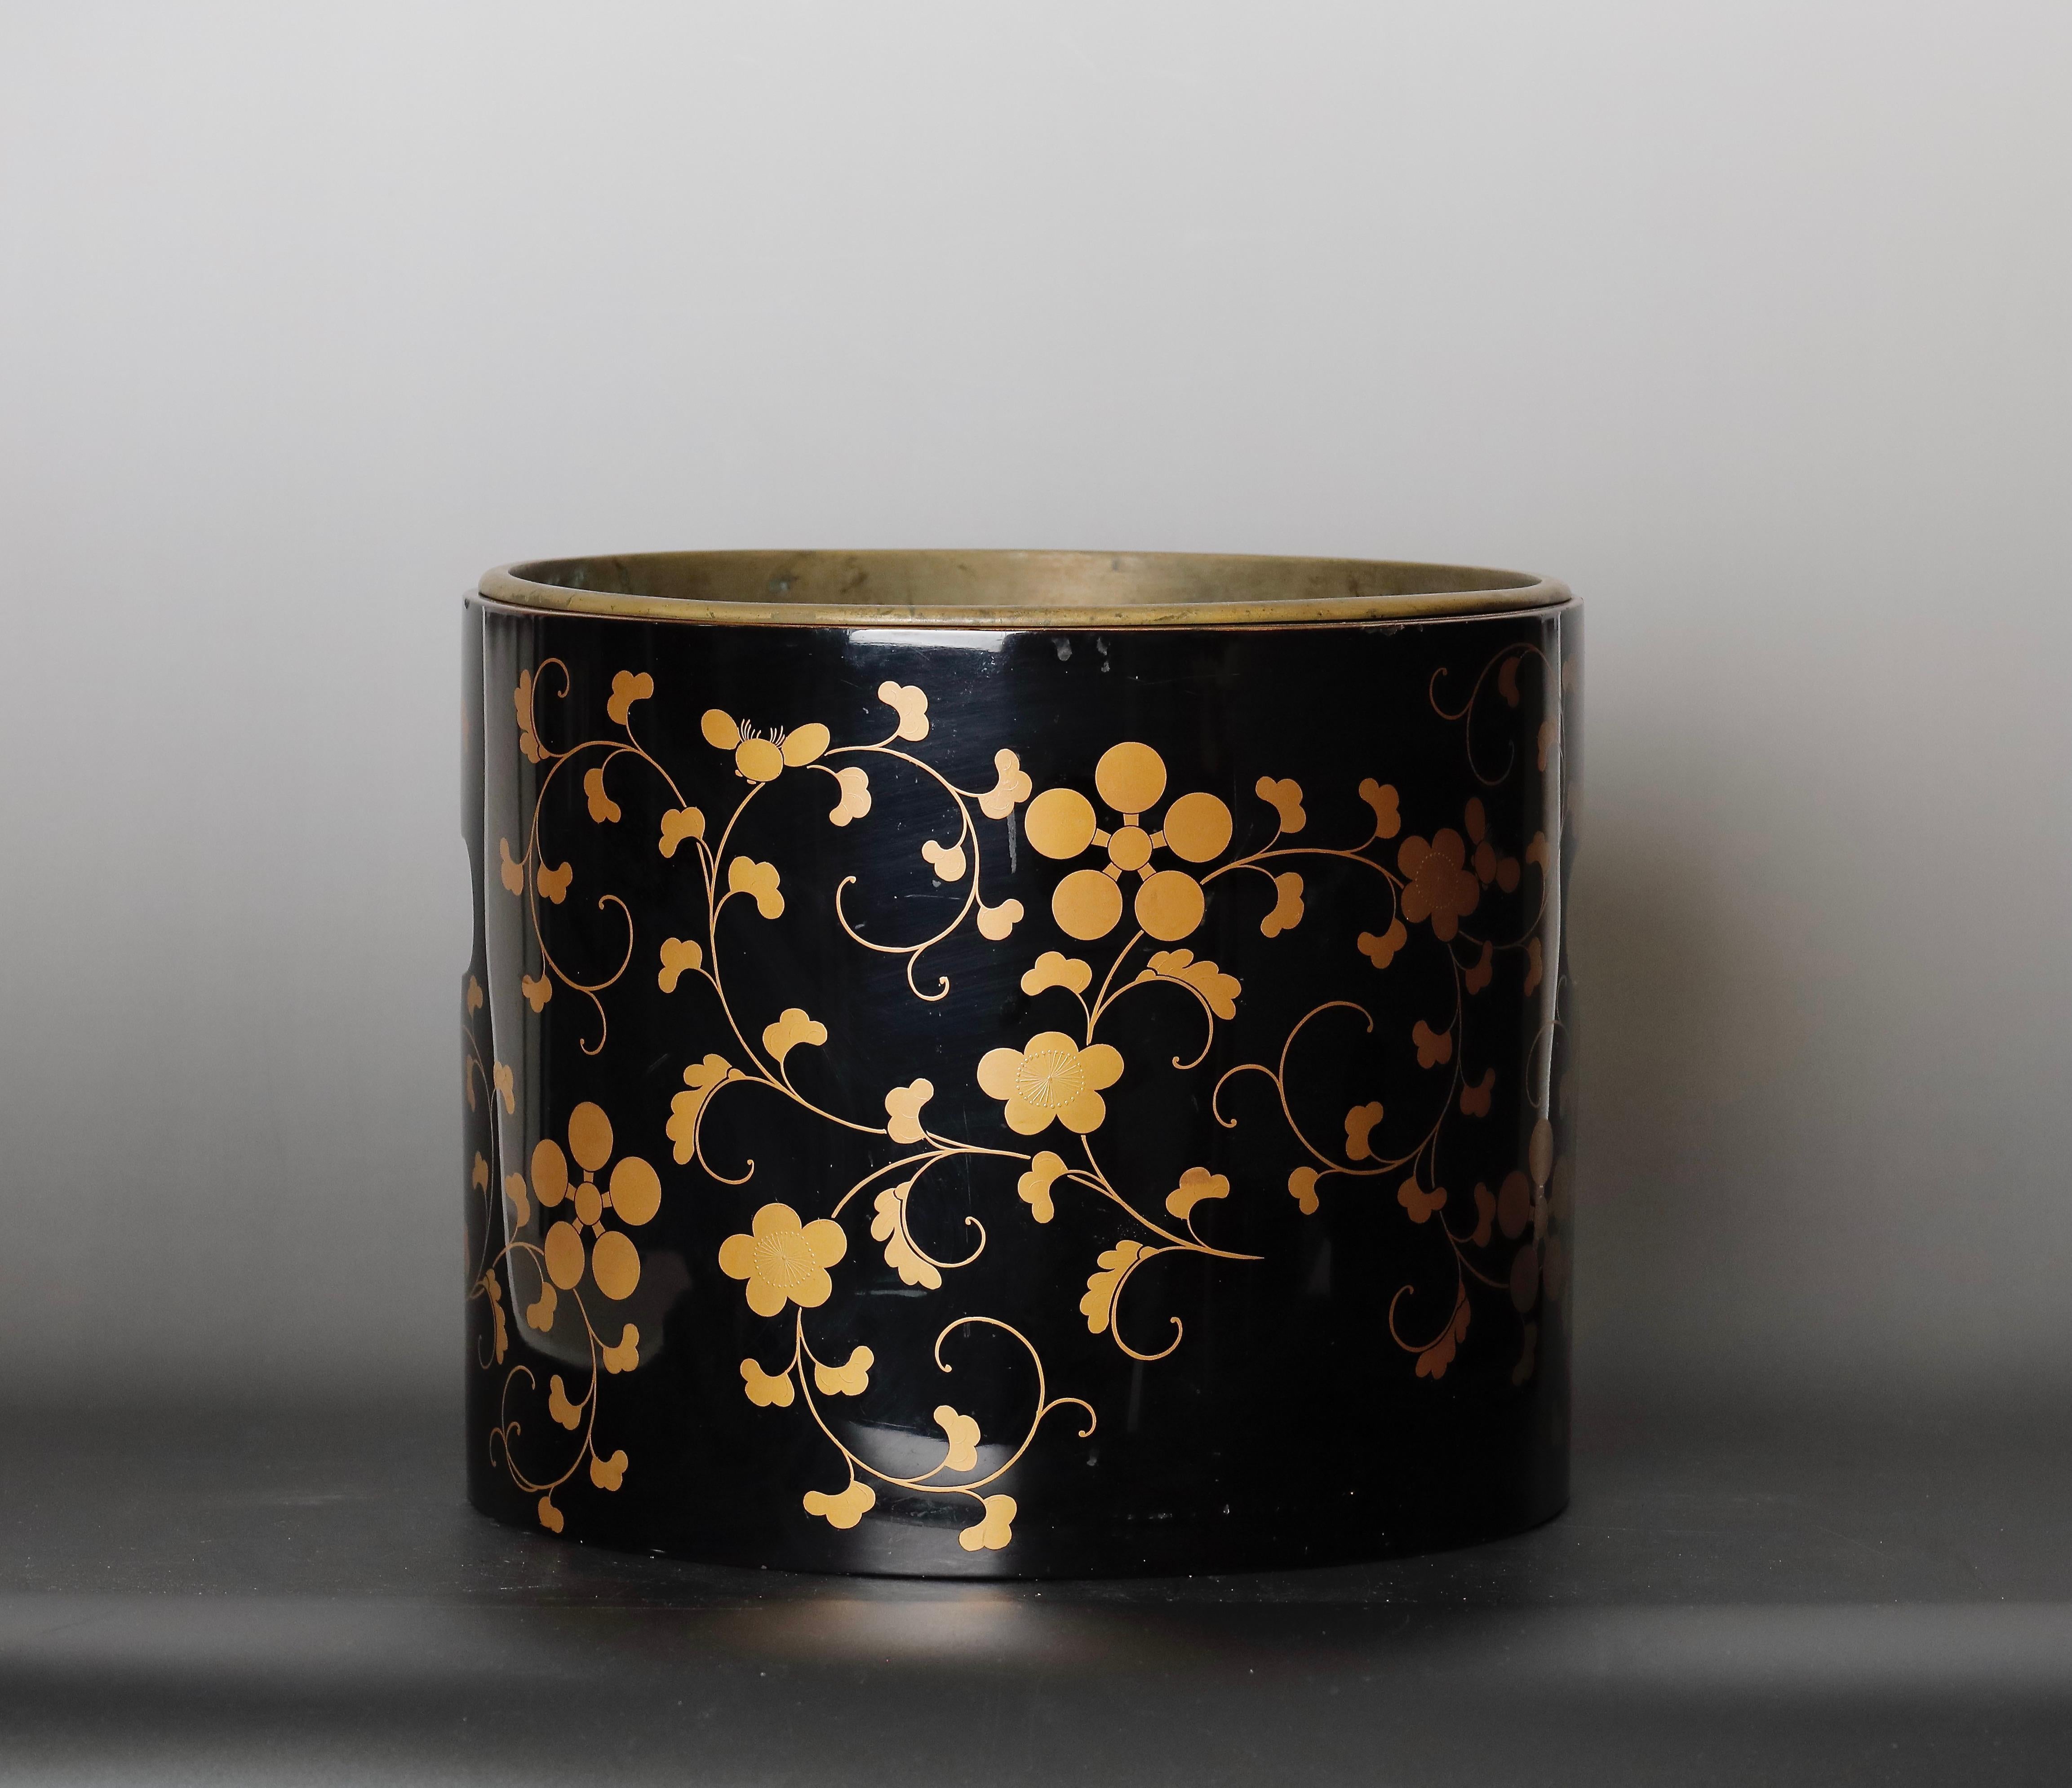 A Fine Lacquer Incense Burner with Makie Gold Design.

This fine lacquer incense burner is a stunning example of Japanese craftsmanship. It is dated to the Edo-Meiji period, 19th century, and is in good condition with some minor abrasions due to its